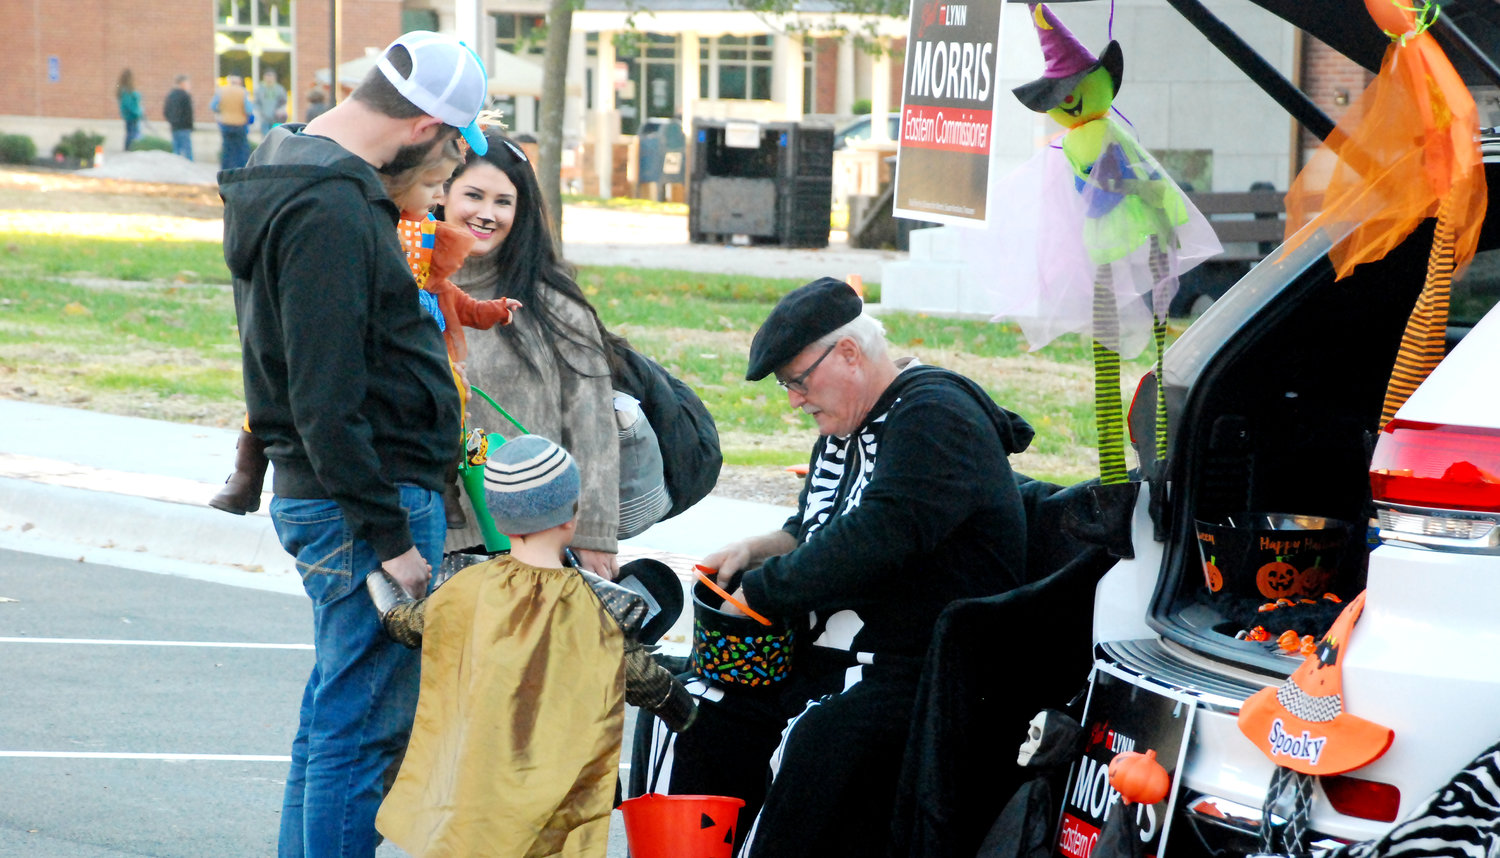 CHRISTIAN COUNTY EASTERN DISTRICT COMMISSIONER LYNN MORRIS (seated) came prepared for the Downtown Ozark Trunk Or Treat with lawn chairs and a not-so-spooky skeleton costume.